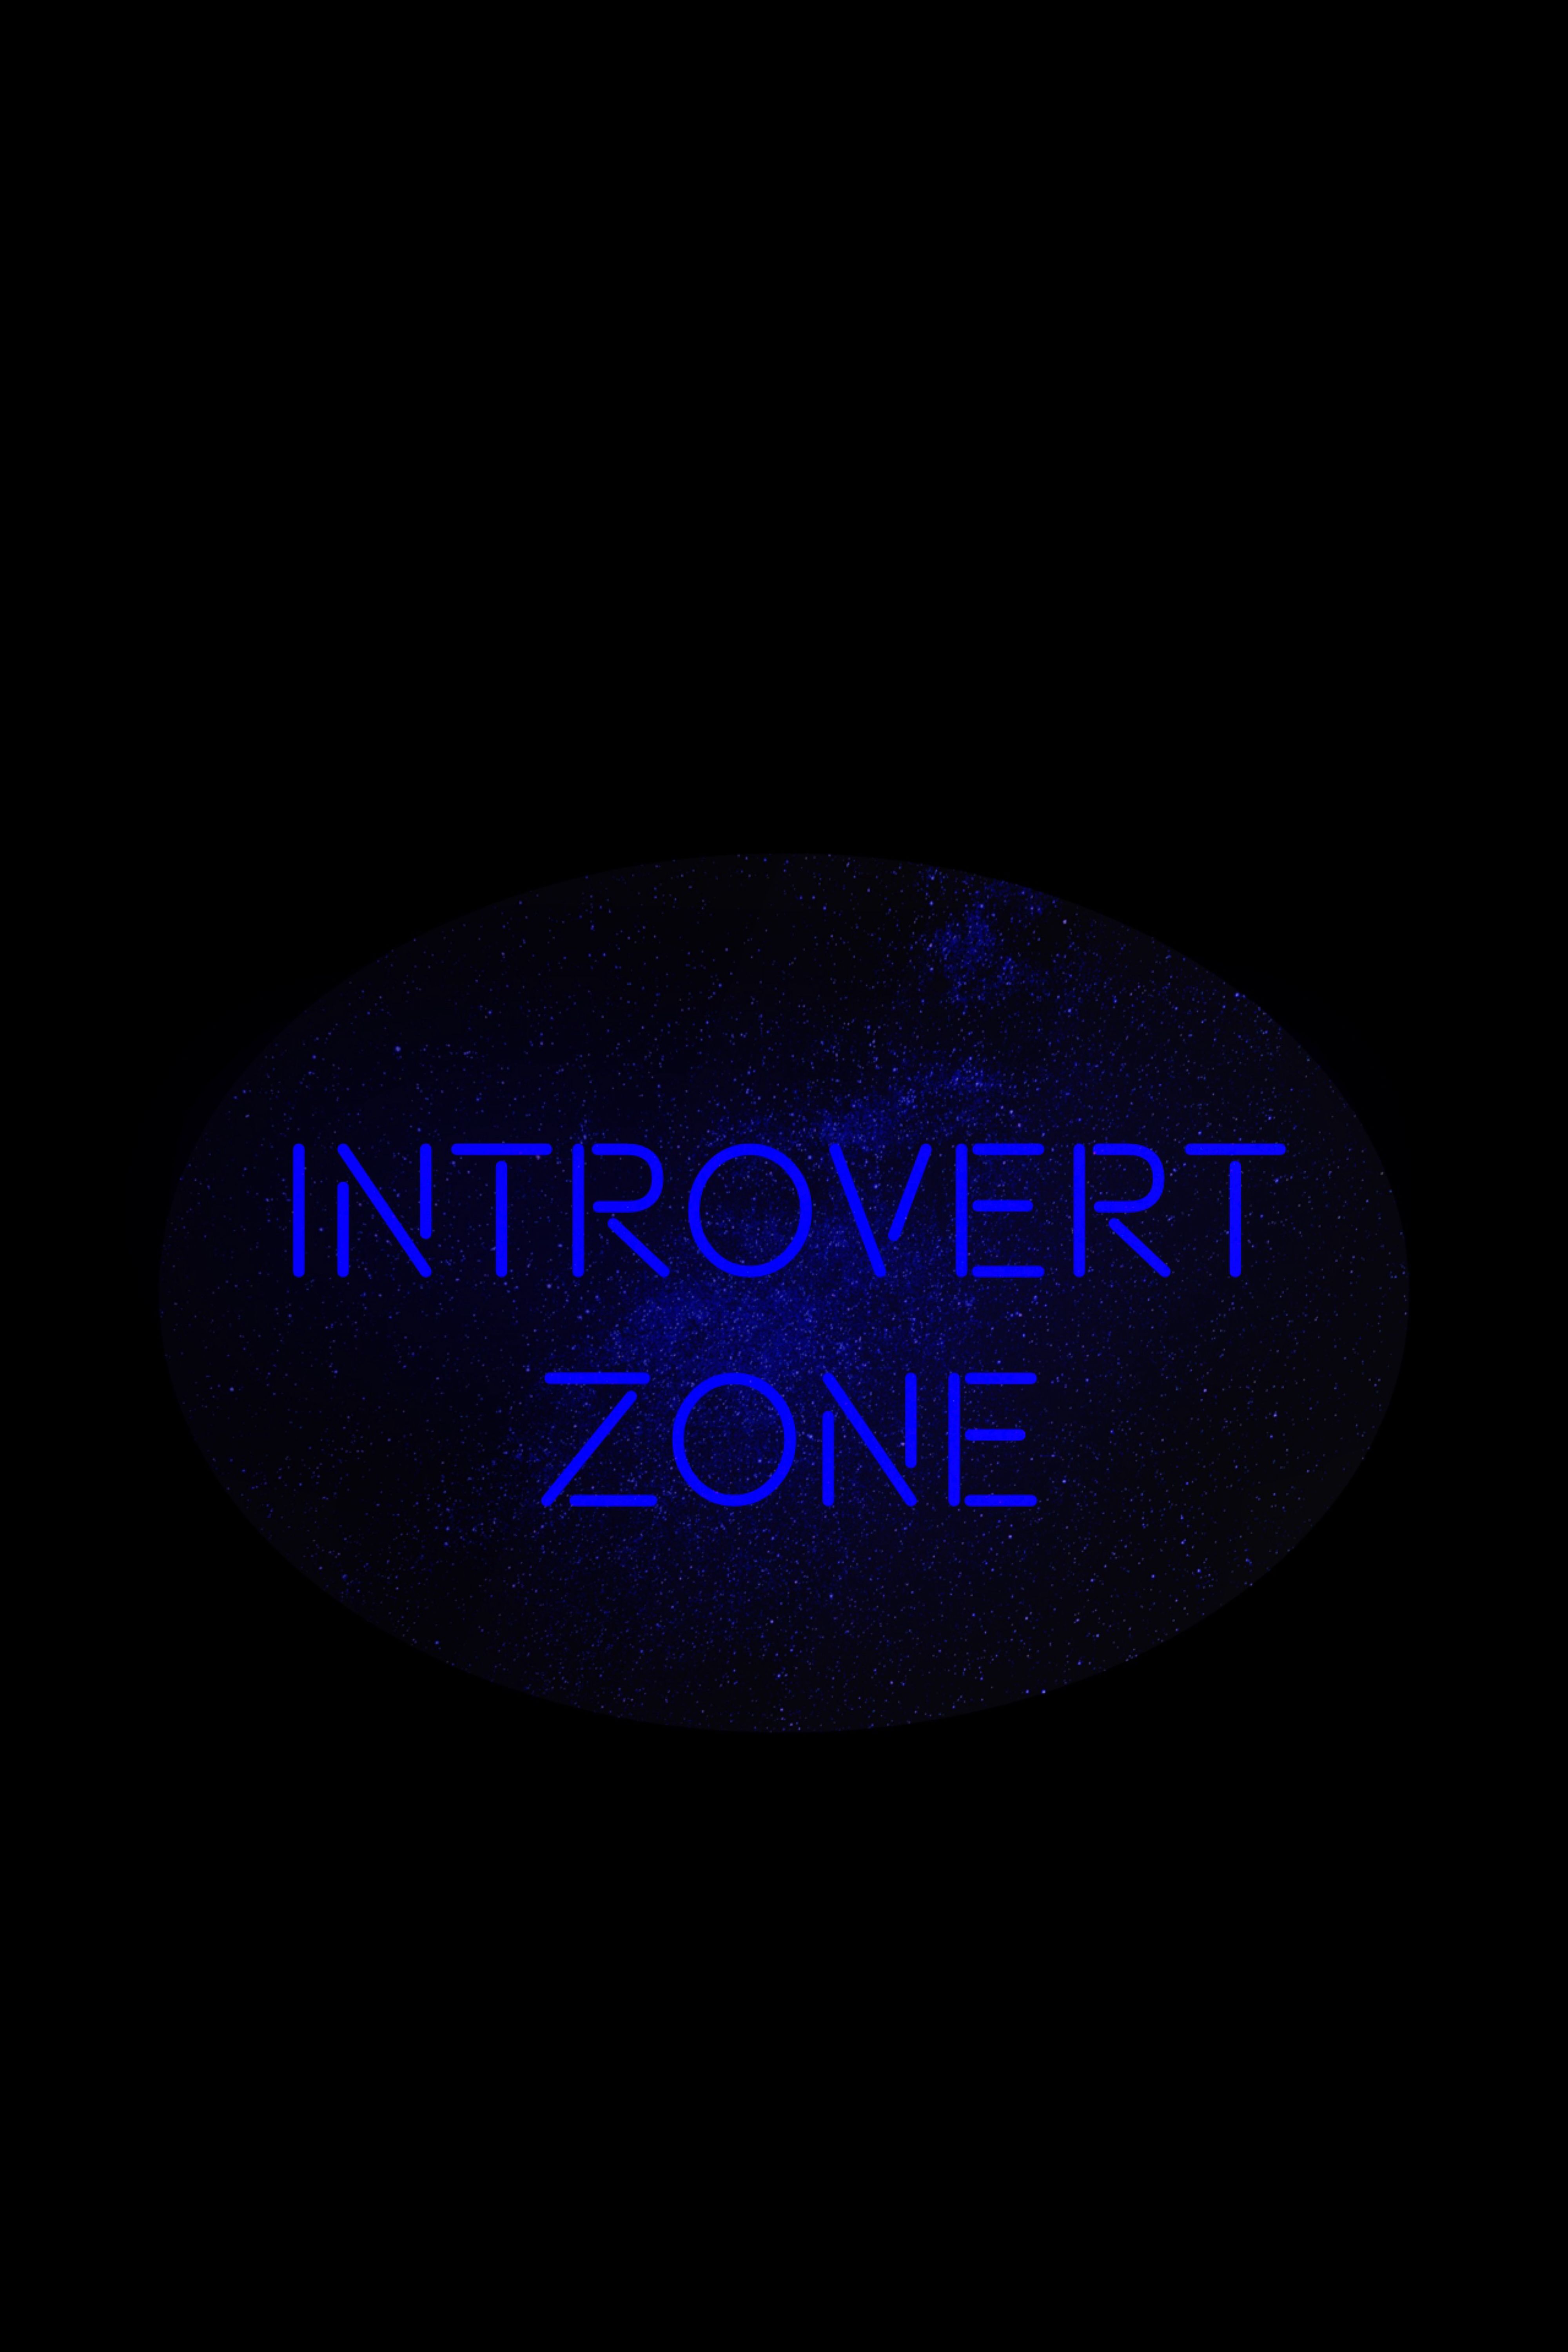 New Lock Screen Wallpapers inscription, introvert, words, territory, zone